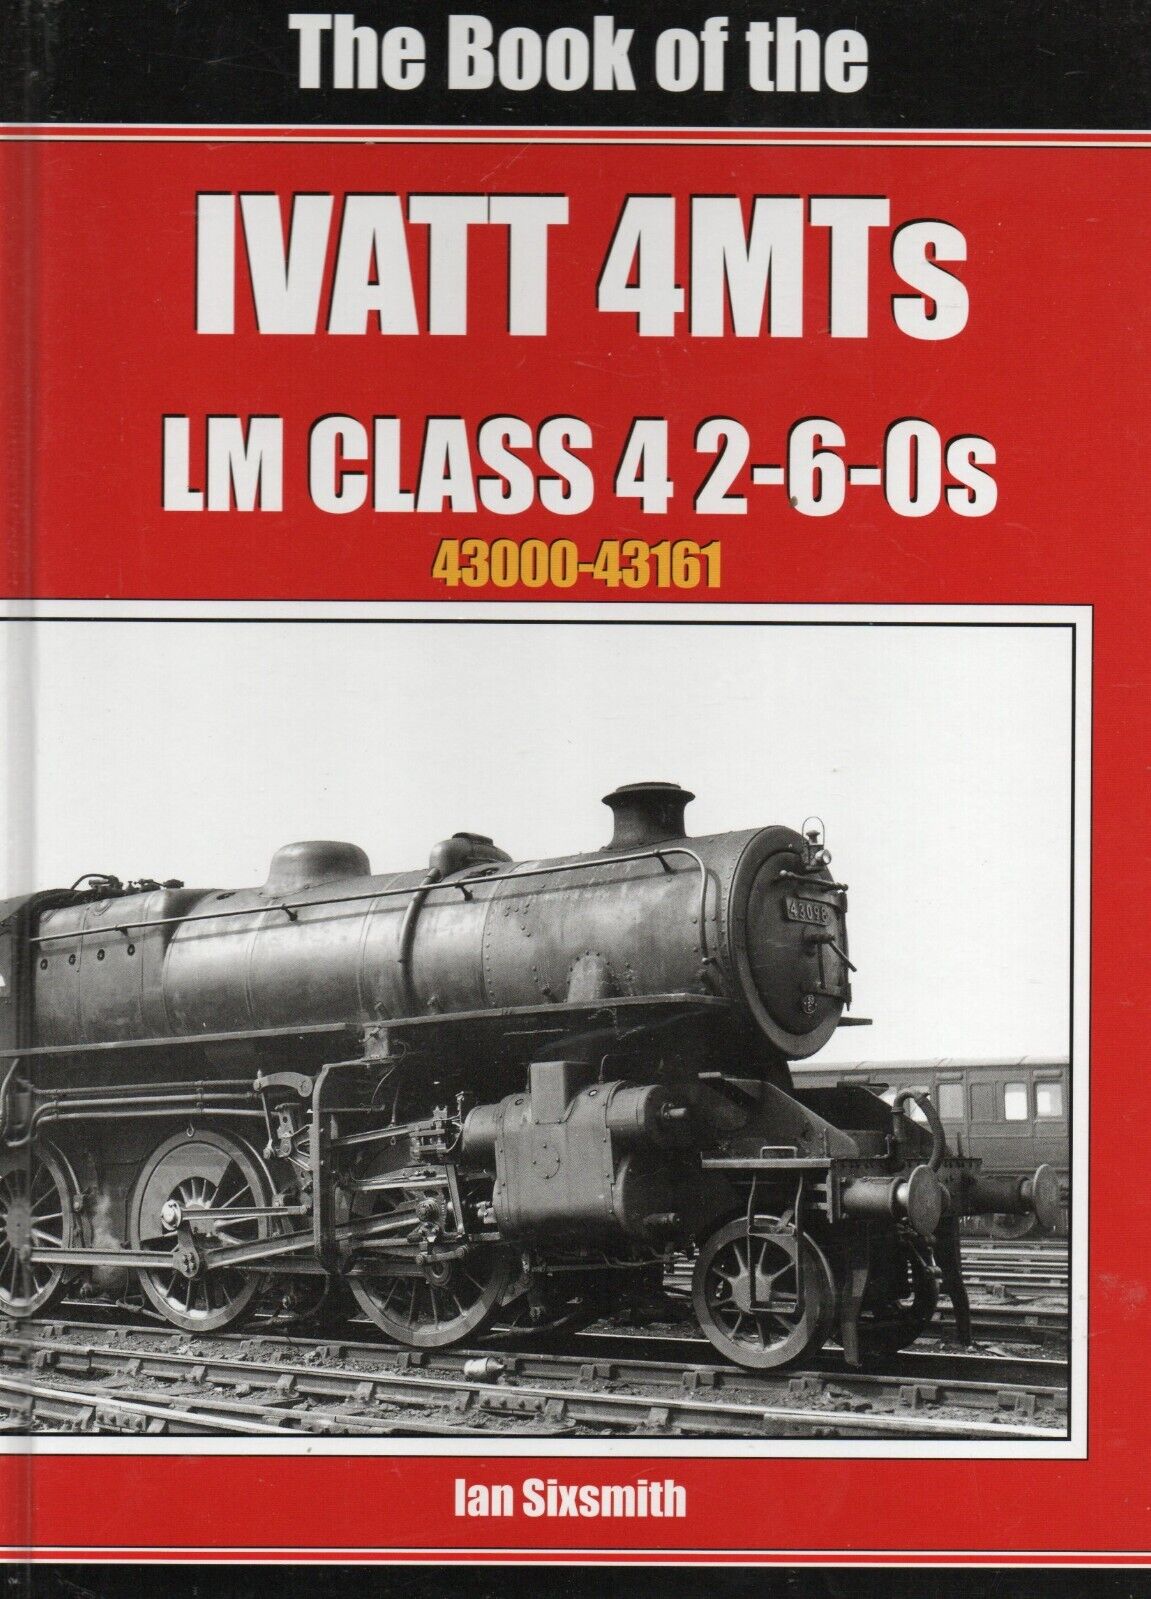 SAVE 50%+ RRP is £27.95 The Book of the IVATT 4MTs LM CLASS 4 2-6-0s 43000 - 43161